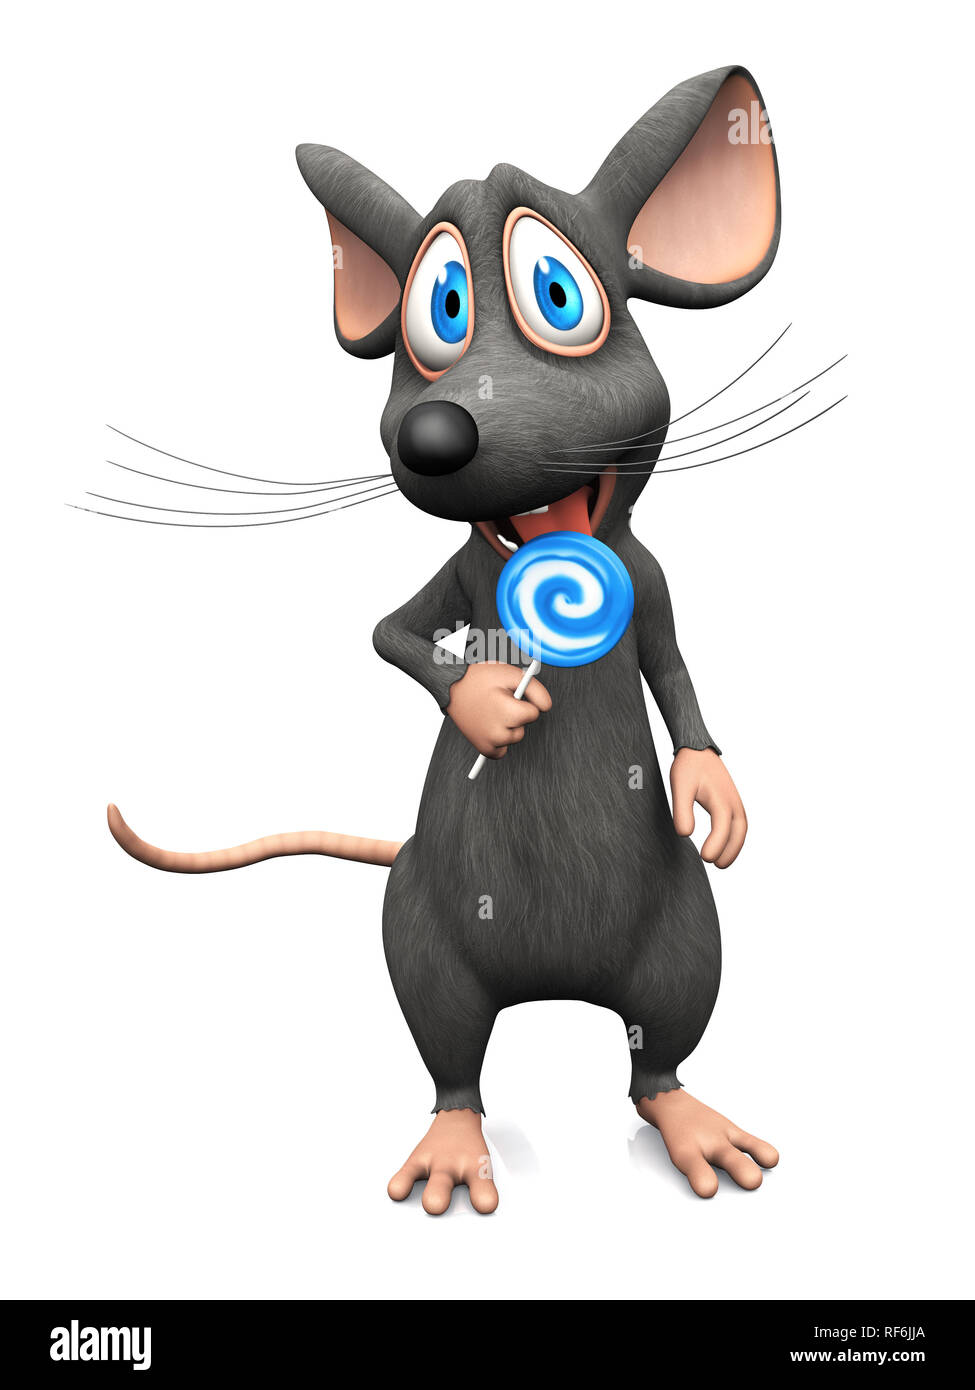 A cute smiling cartoon mouse licking a big blue lollipop. White background. Stock Photo